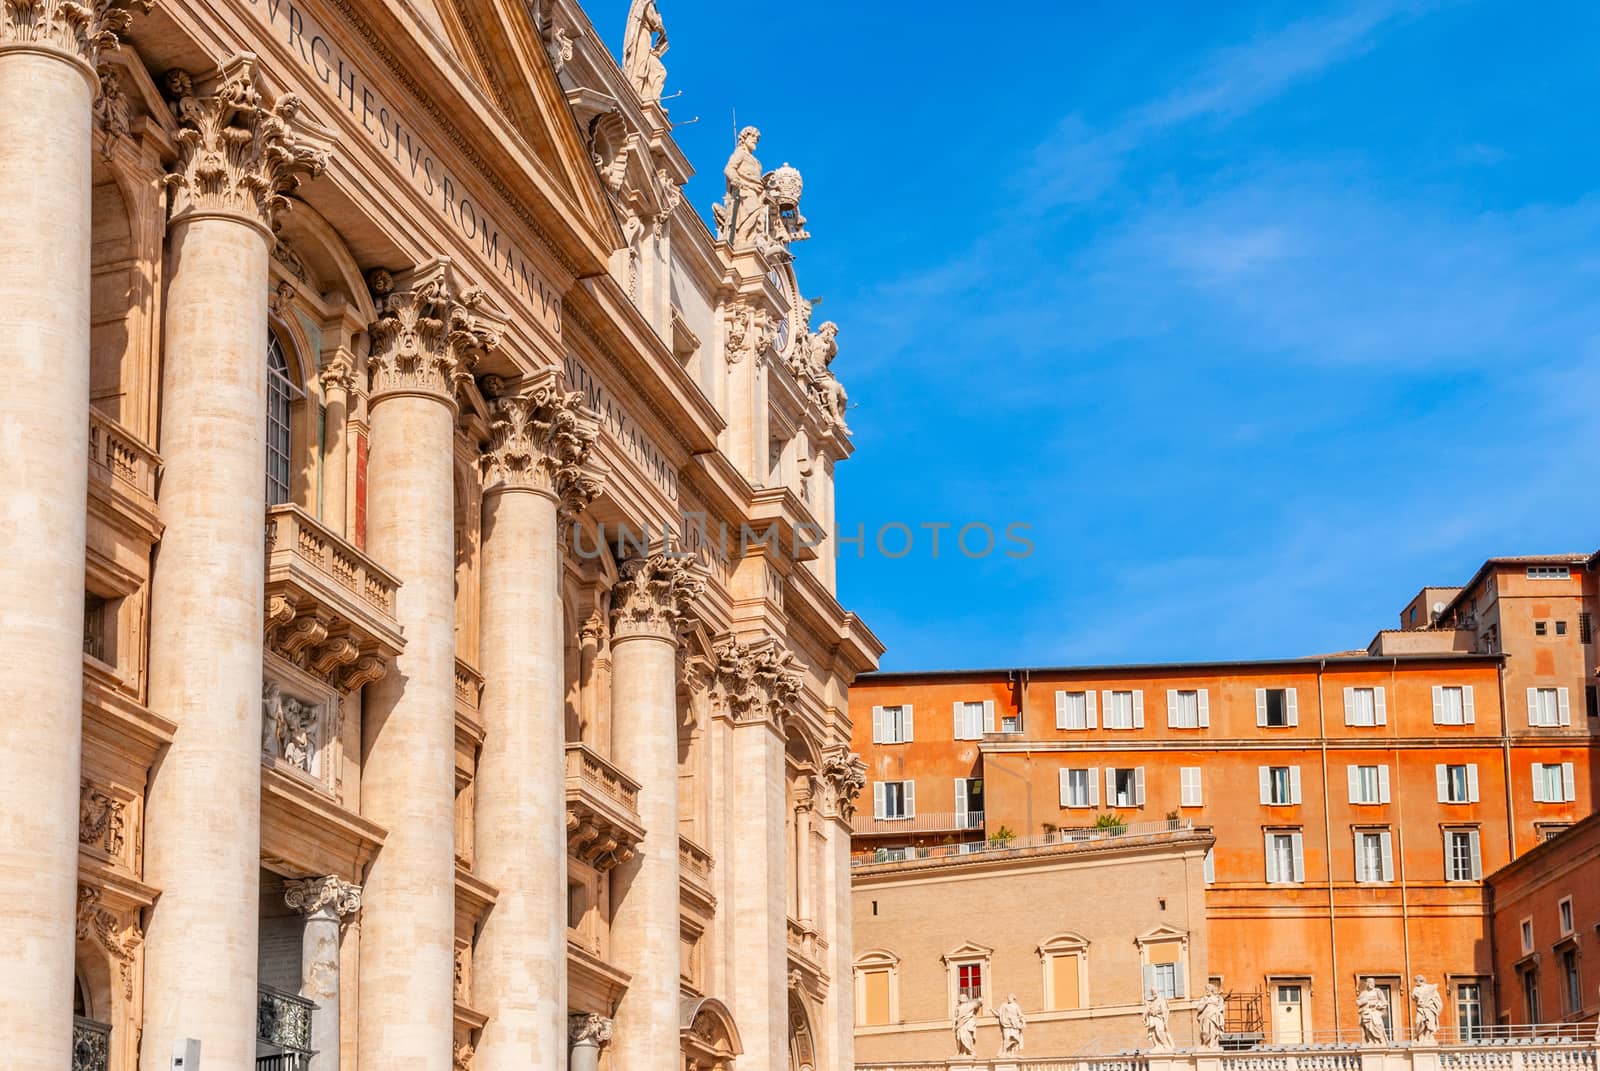 St Peter's Basilica on blue sky background. Vatican, Italy